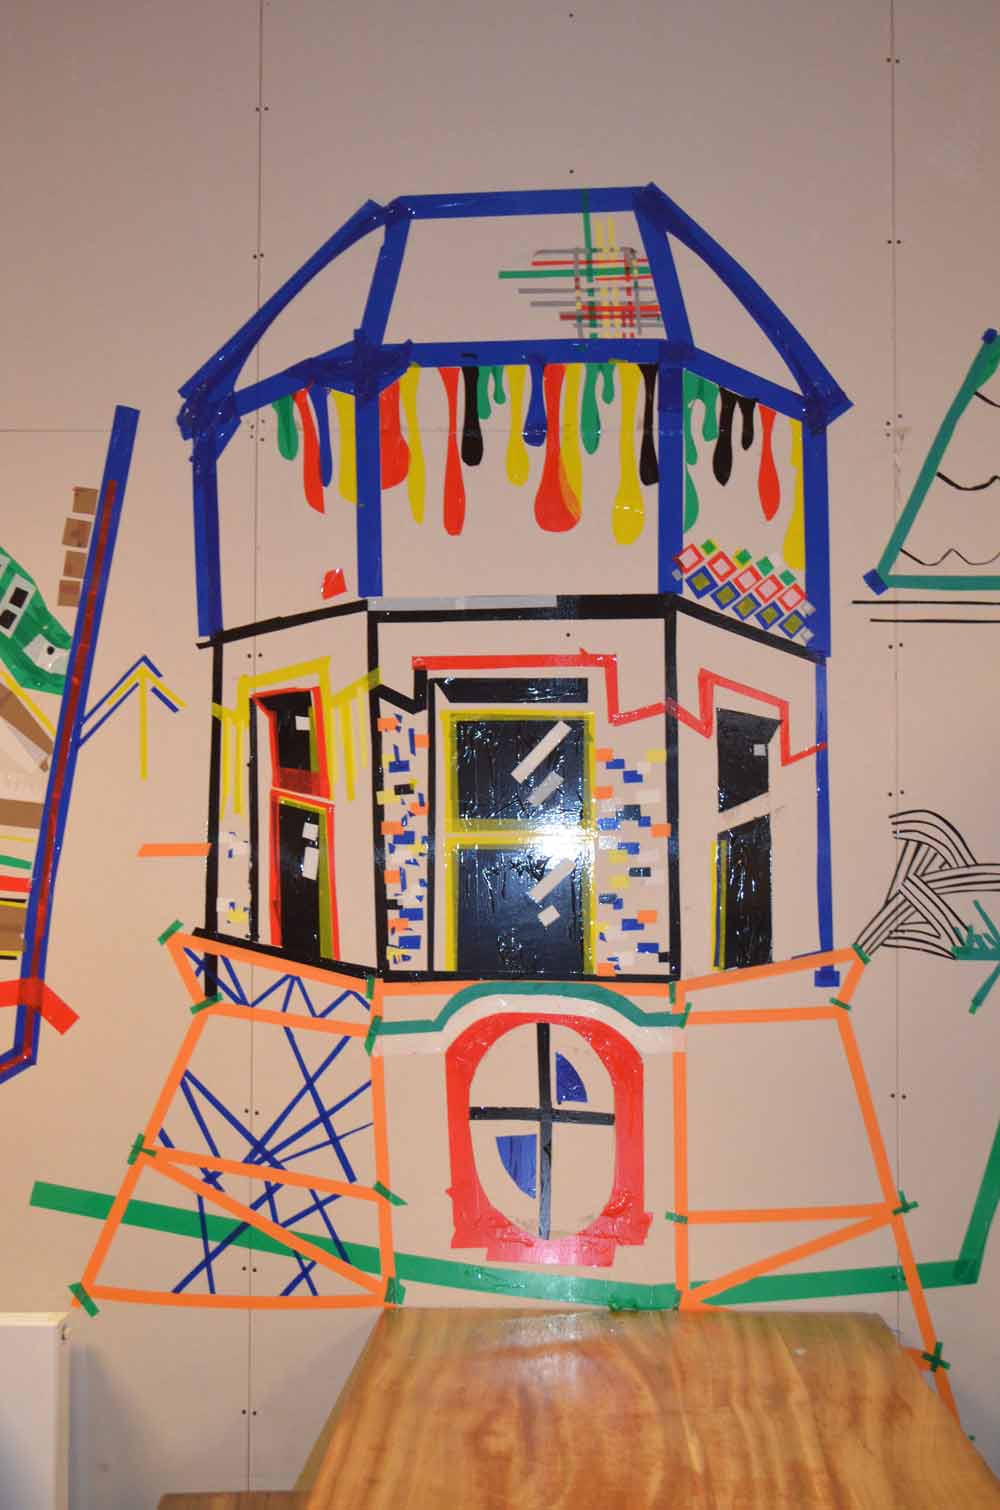 Tape House Murals 2015 - Dining Hall